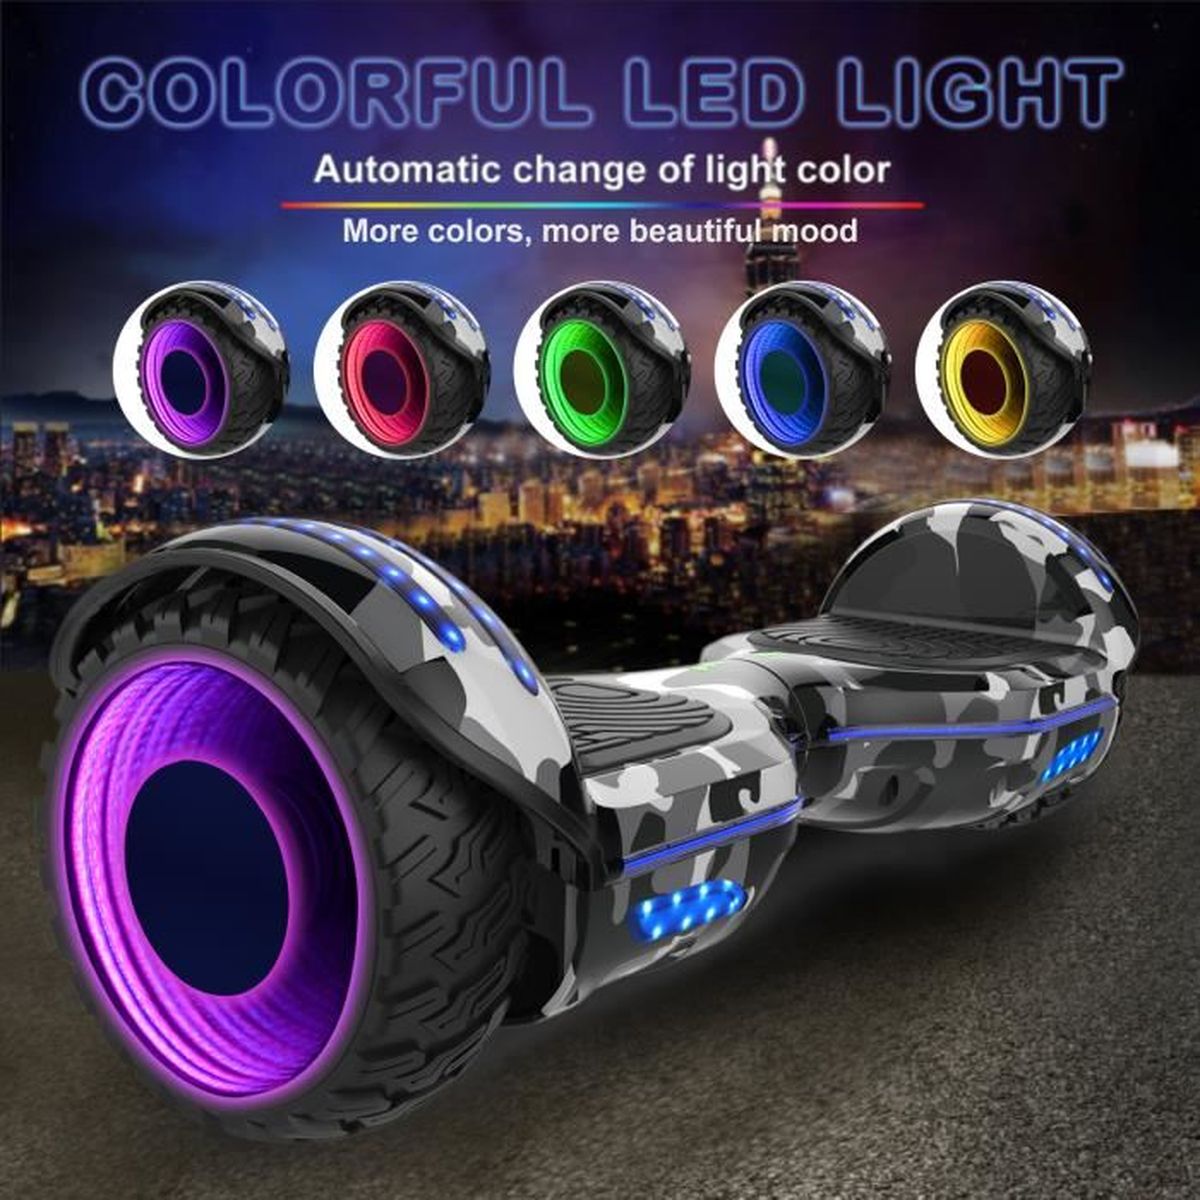 Scooter Electrique Moteur 700W Tout-Terrain Hoverkart COLORWAY Overboard Hover Scooter Board Gyropode Bluetooth SUV 6.5 Pouces Self-Balance Board avec Roues LED Flash 